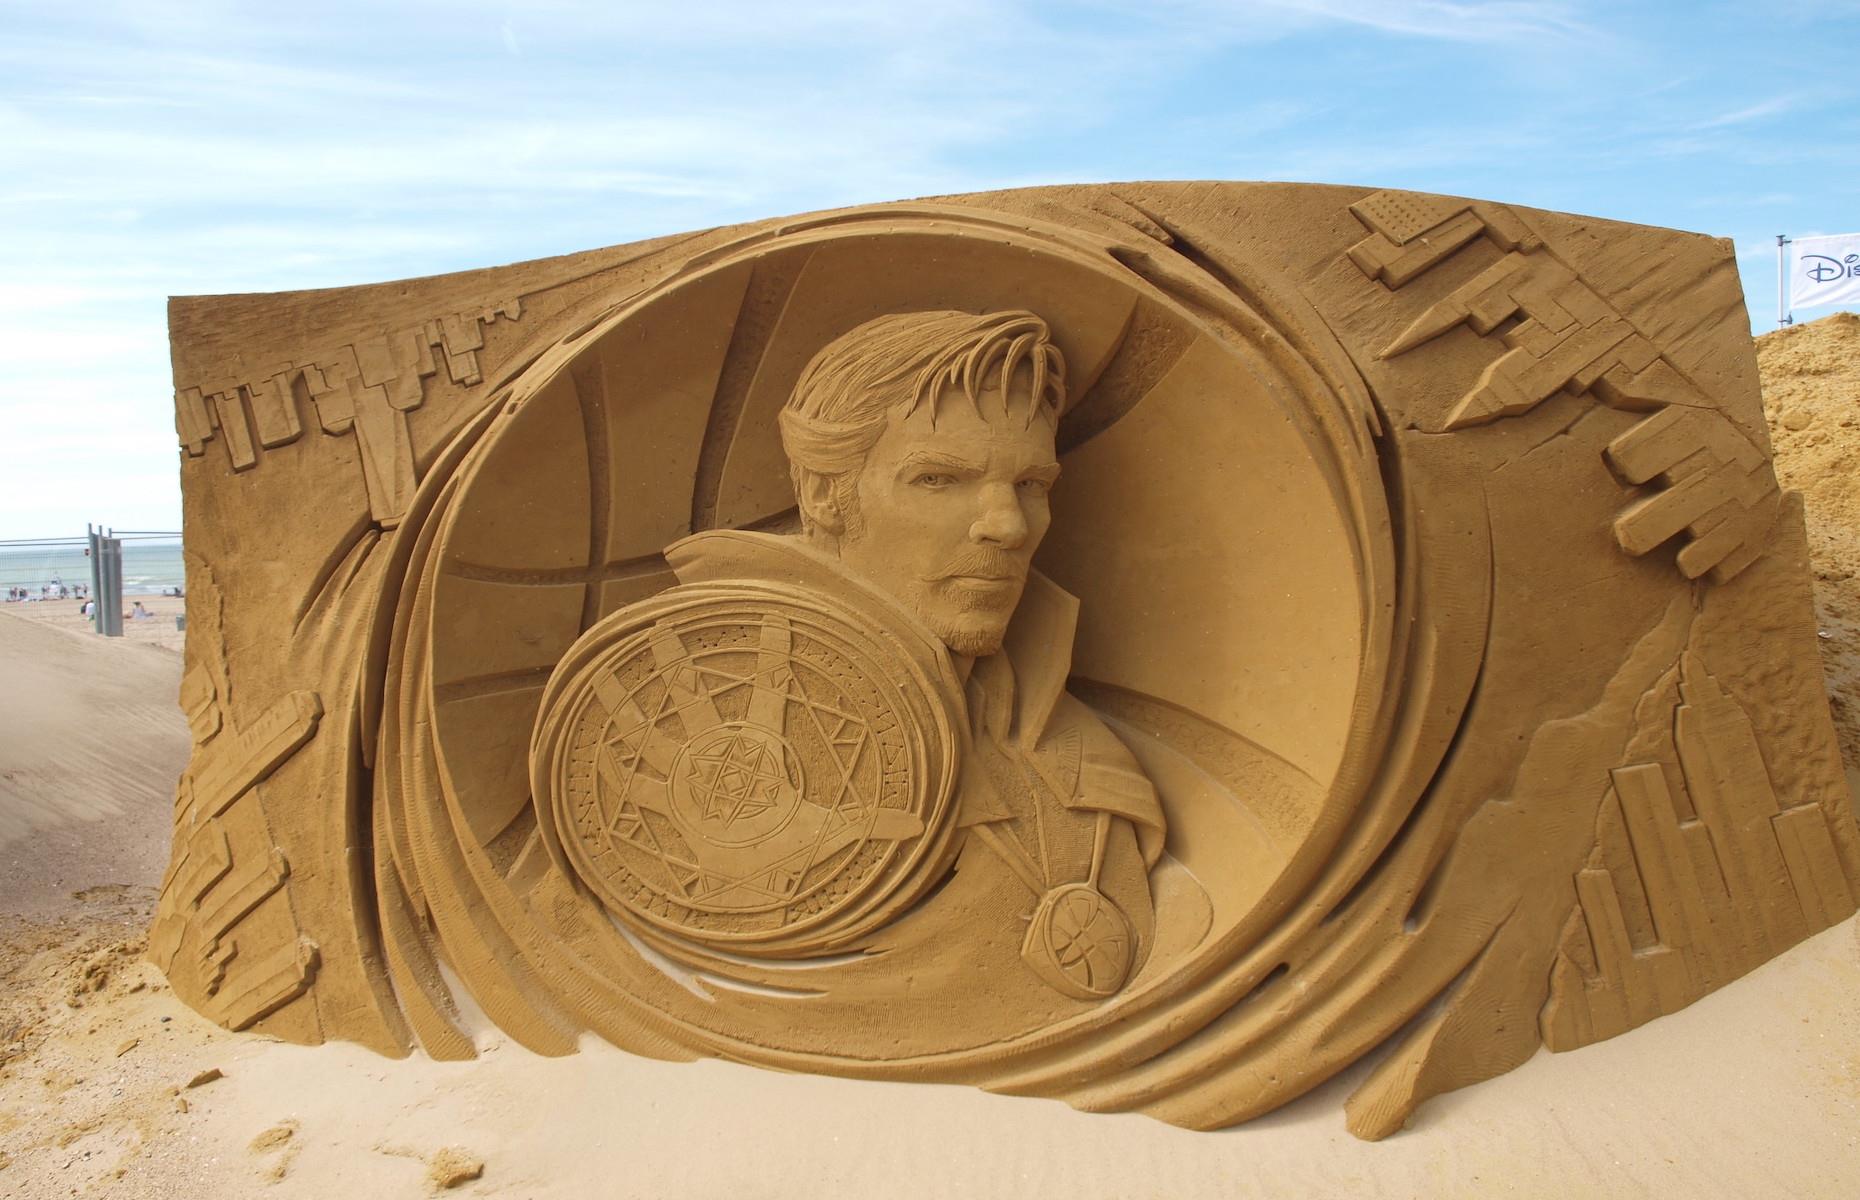 Incredibly true-to-life and larger-than-life sand creations of characters from Pixar, Marvel and Star Wars films were also on display at the popular seaside event, such as Marvel's Doctor Strange. The artists use only sand and water to build their intricate and towering works of art.